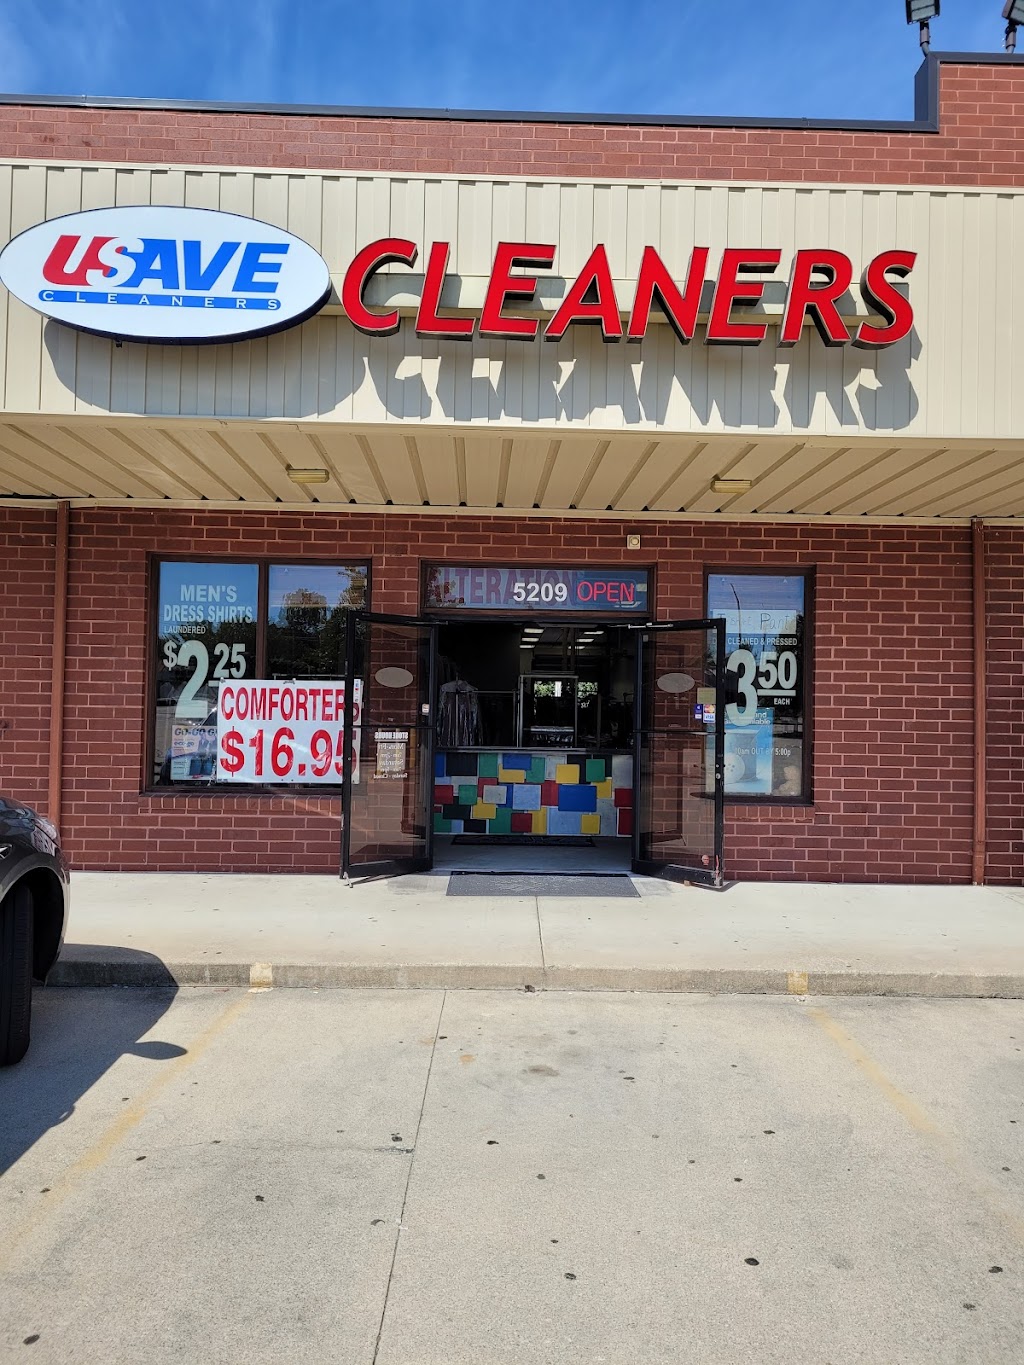 USAVE Cleaners | 5209 N Illinois St, Fairview Heights, IL 62208 | Phone: (618) 239-6646